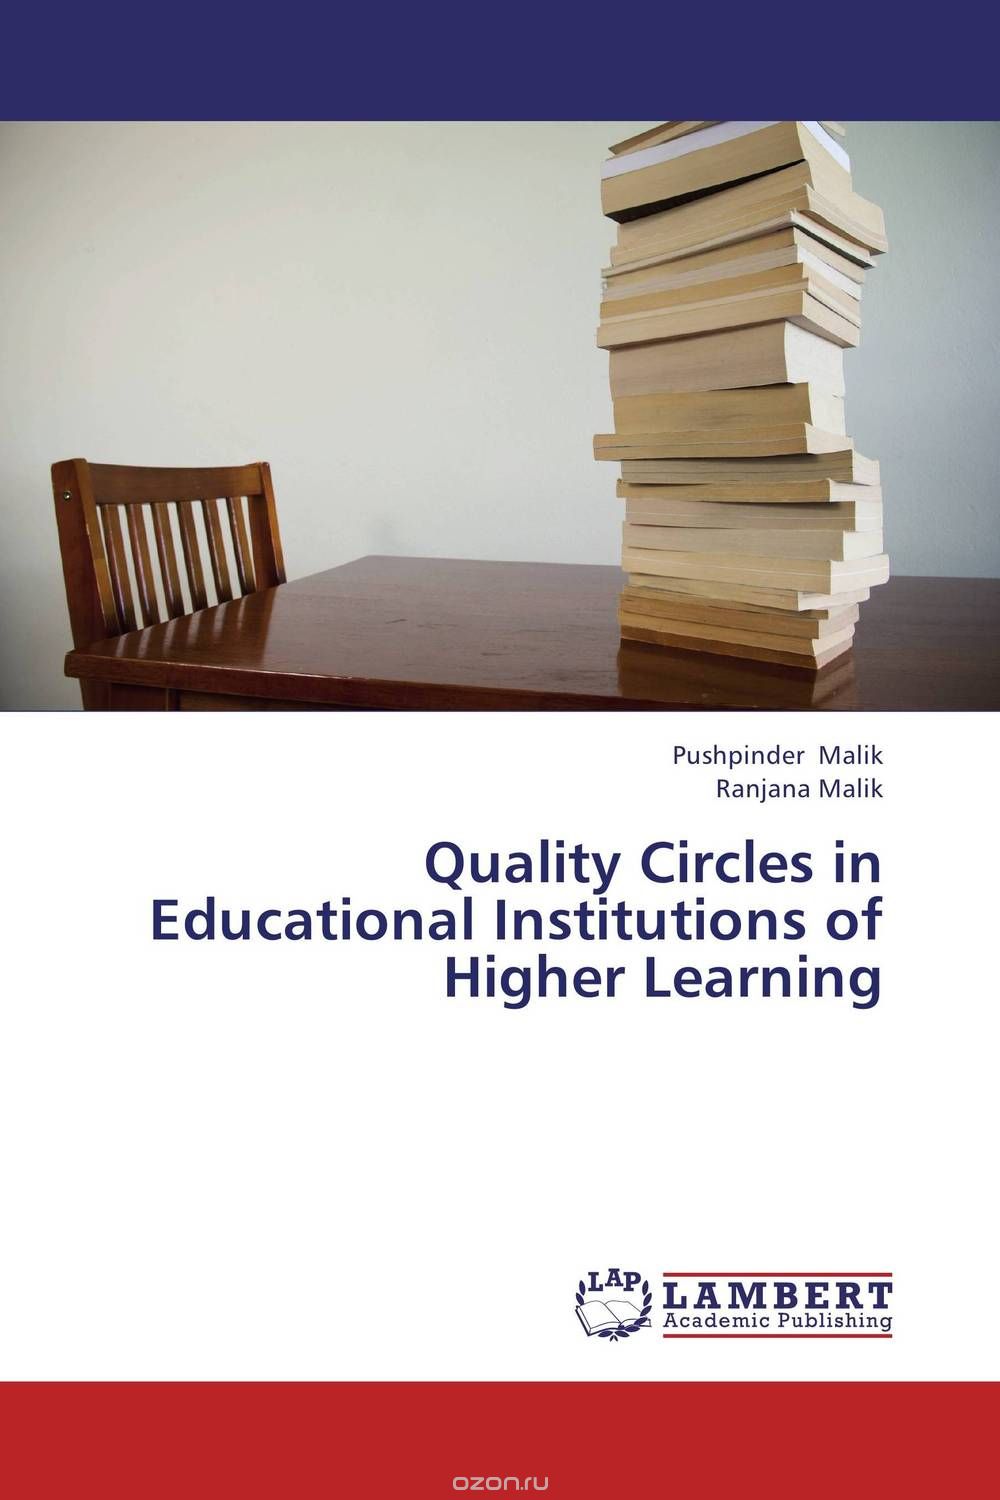 Quality Circles in Educational Institutions of Higher Learning